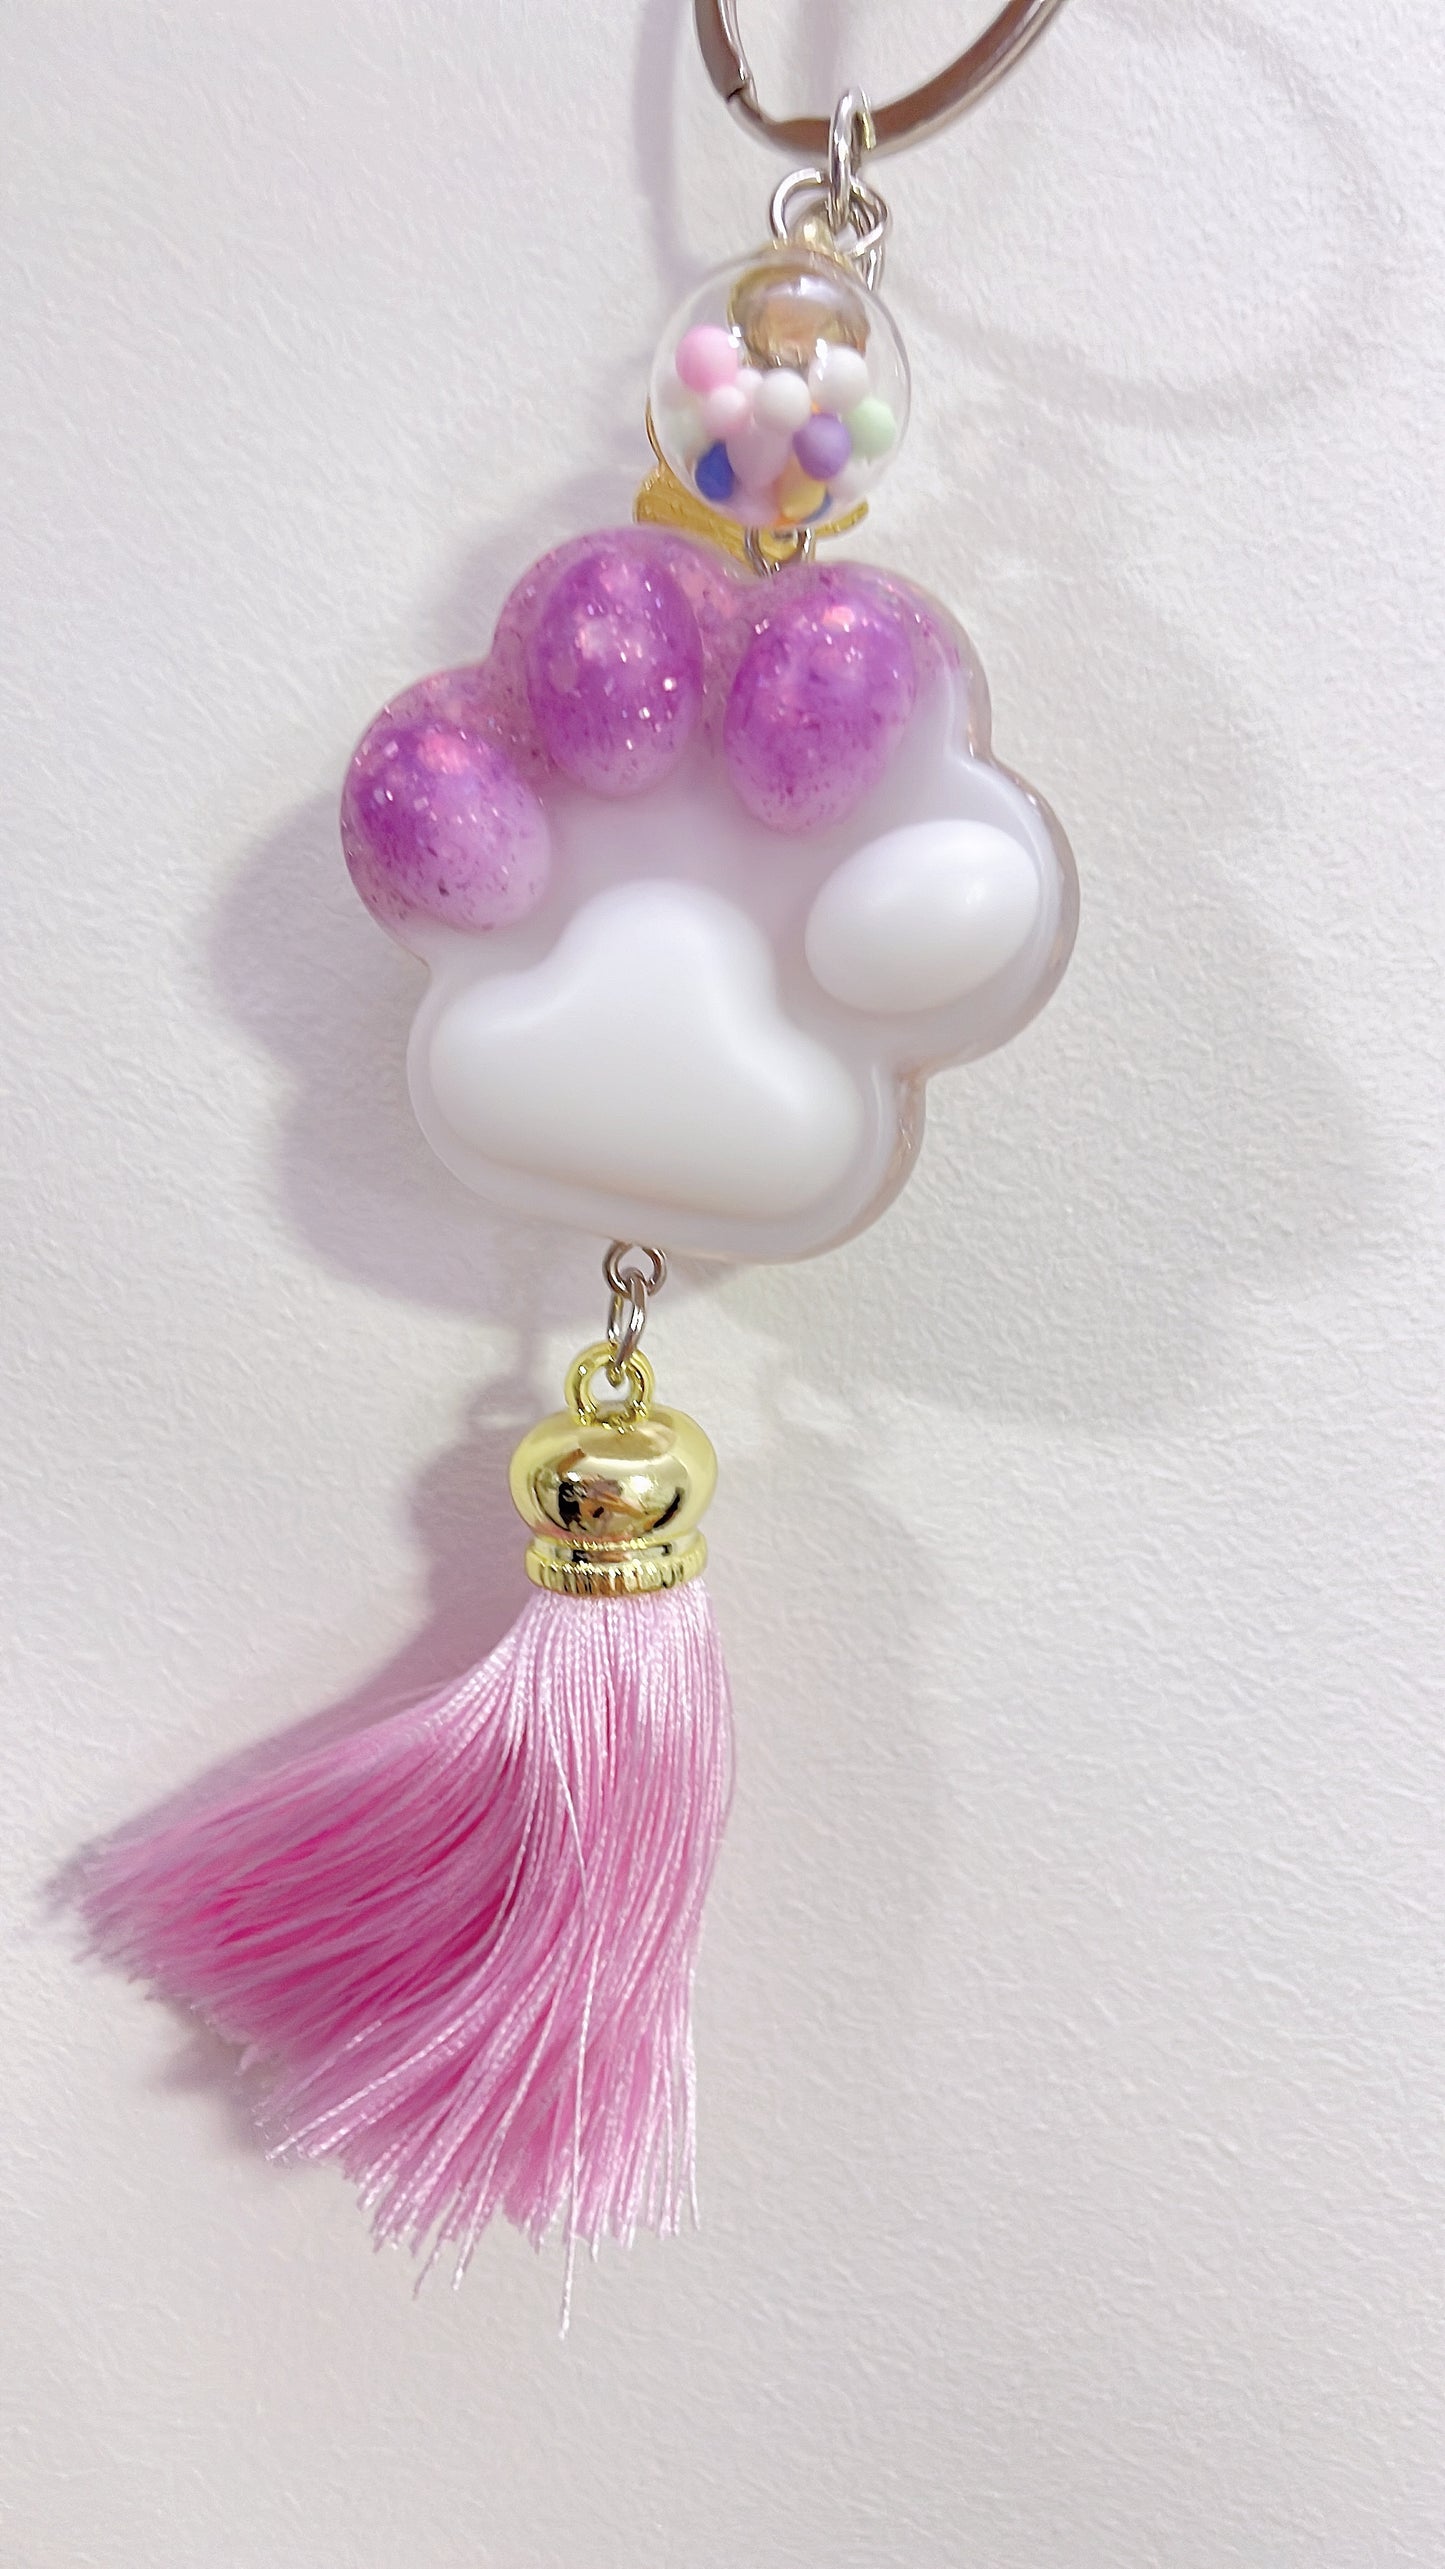 Creative Resin Cats Claws - Ceramics Flower Keychain Keyring